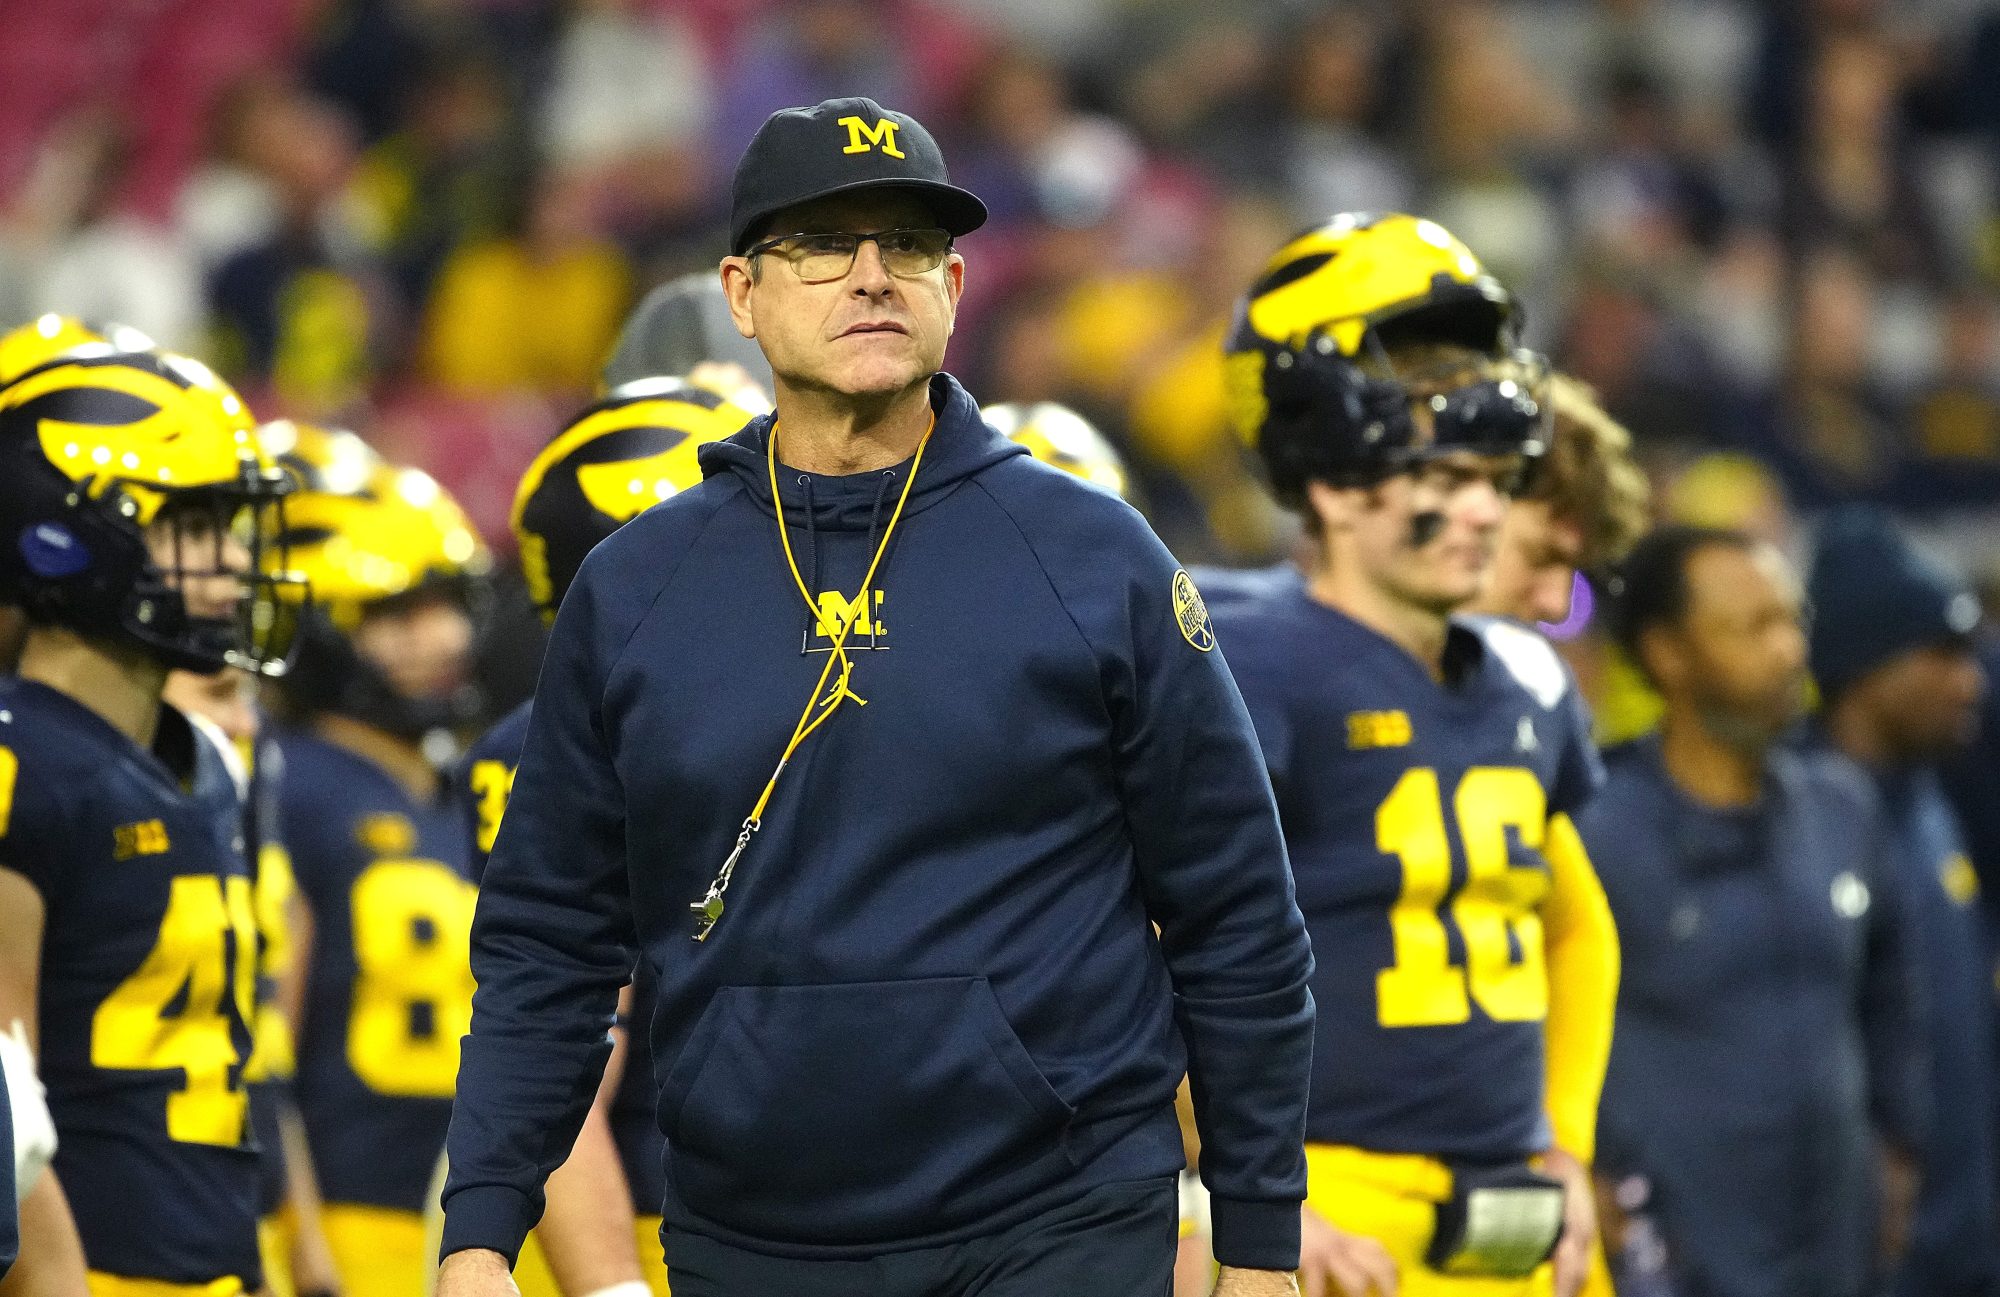 Michigan head coach Jim Harbaugh's comments on athlete compensation highlight the NCAA's hypocrisy.